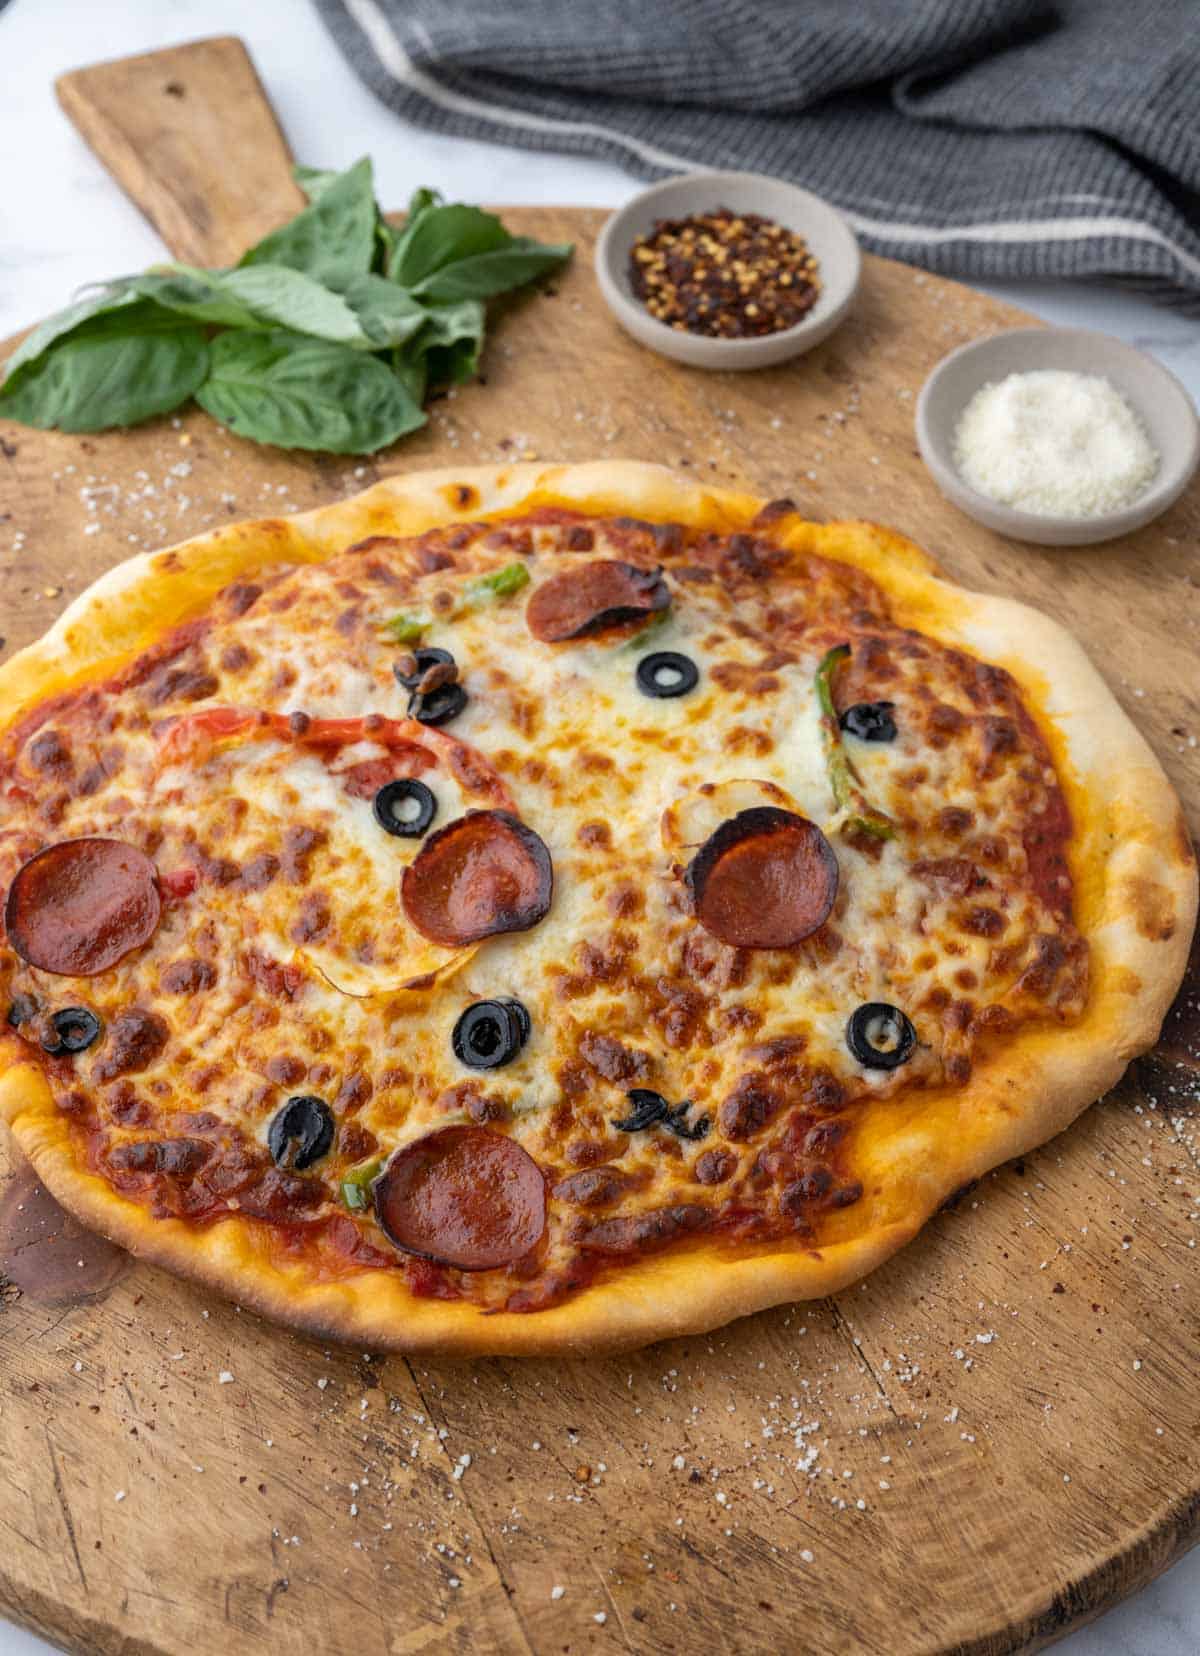 A homemade pizza topped with pepperoni, mozzarella, cheese, peppers, and olives set on a wooden board garnished with basil, red pepper flakes, and parmesan cheese.